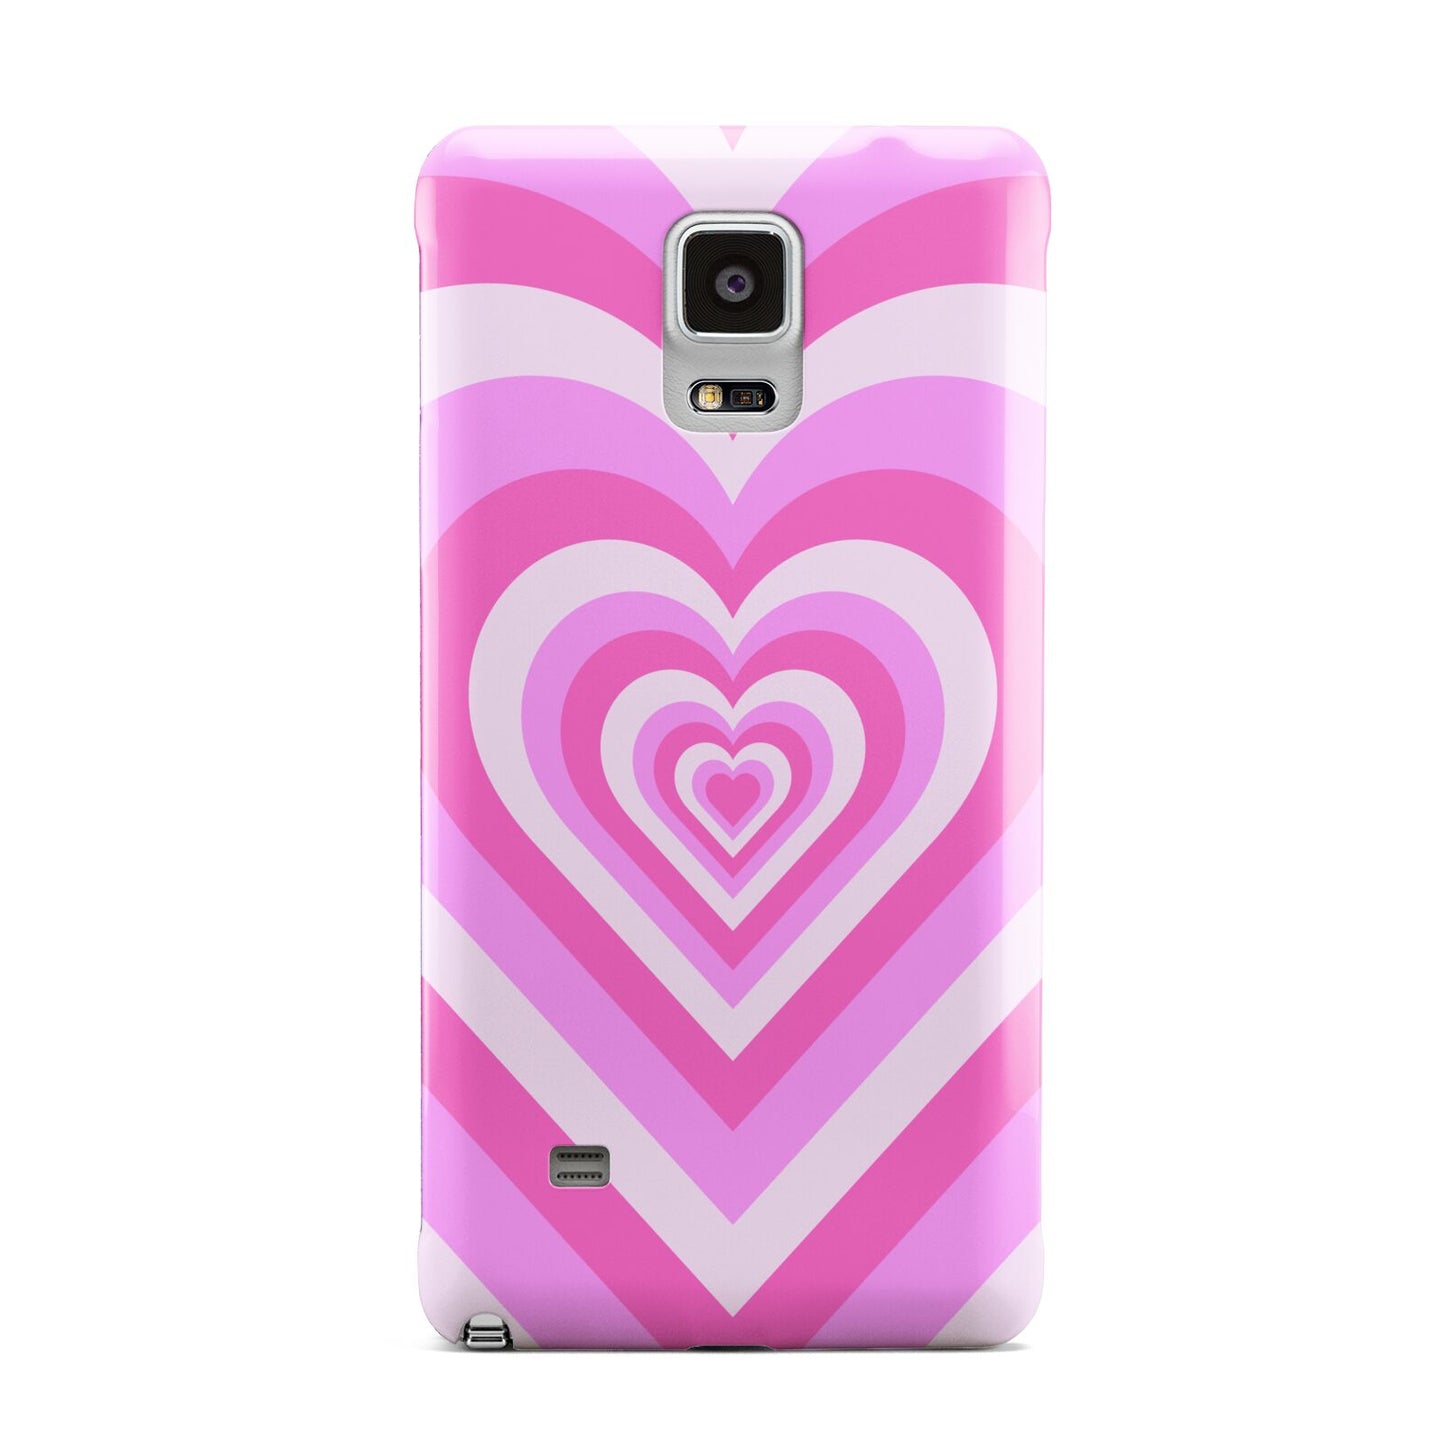 Aesthetic Heart Samsung Galaxy Note 4 Case